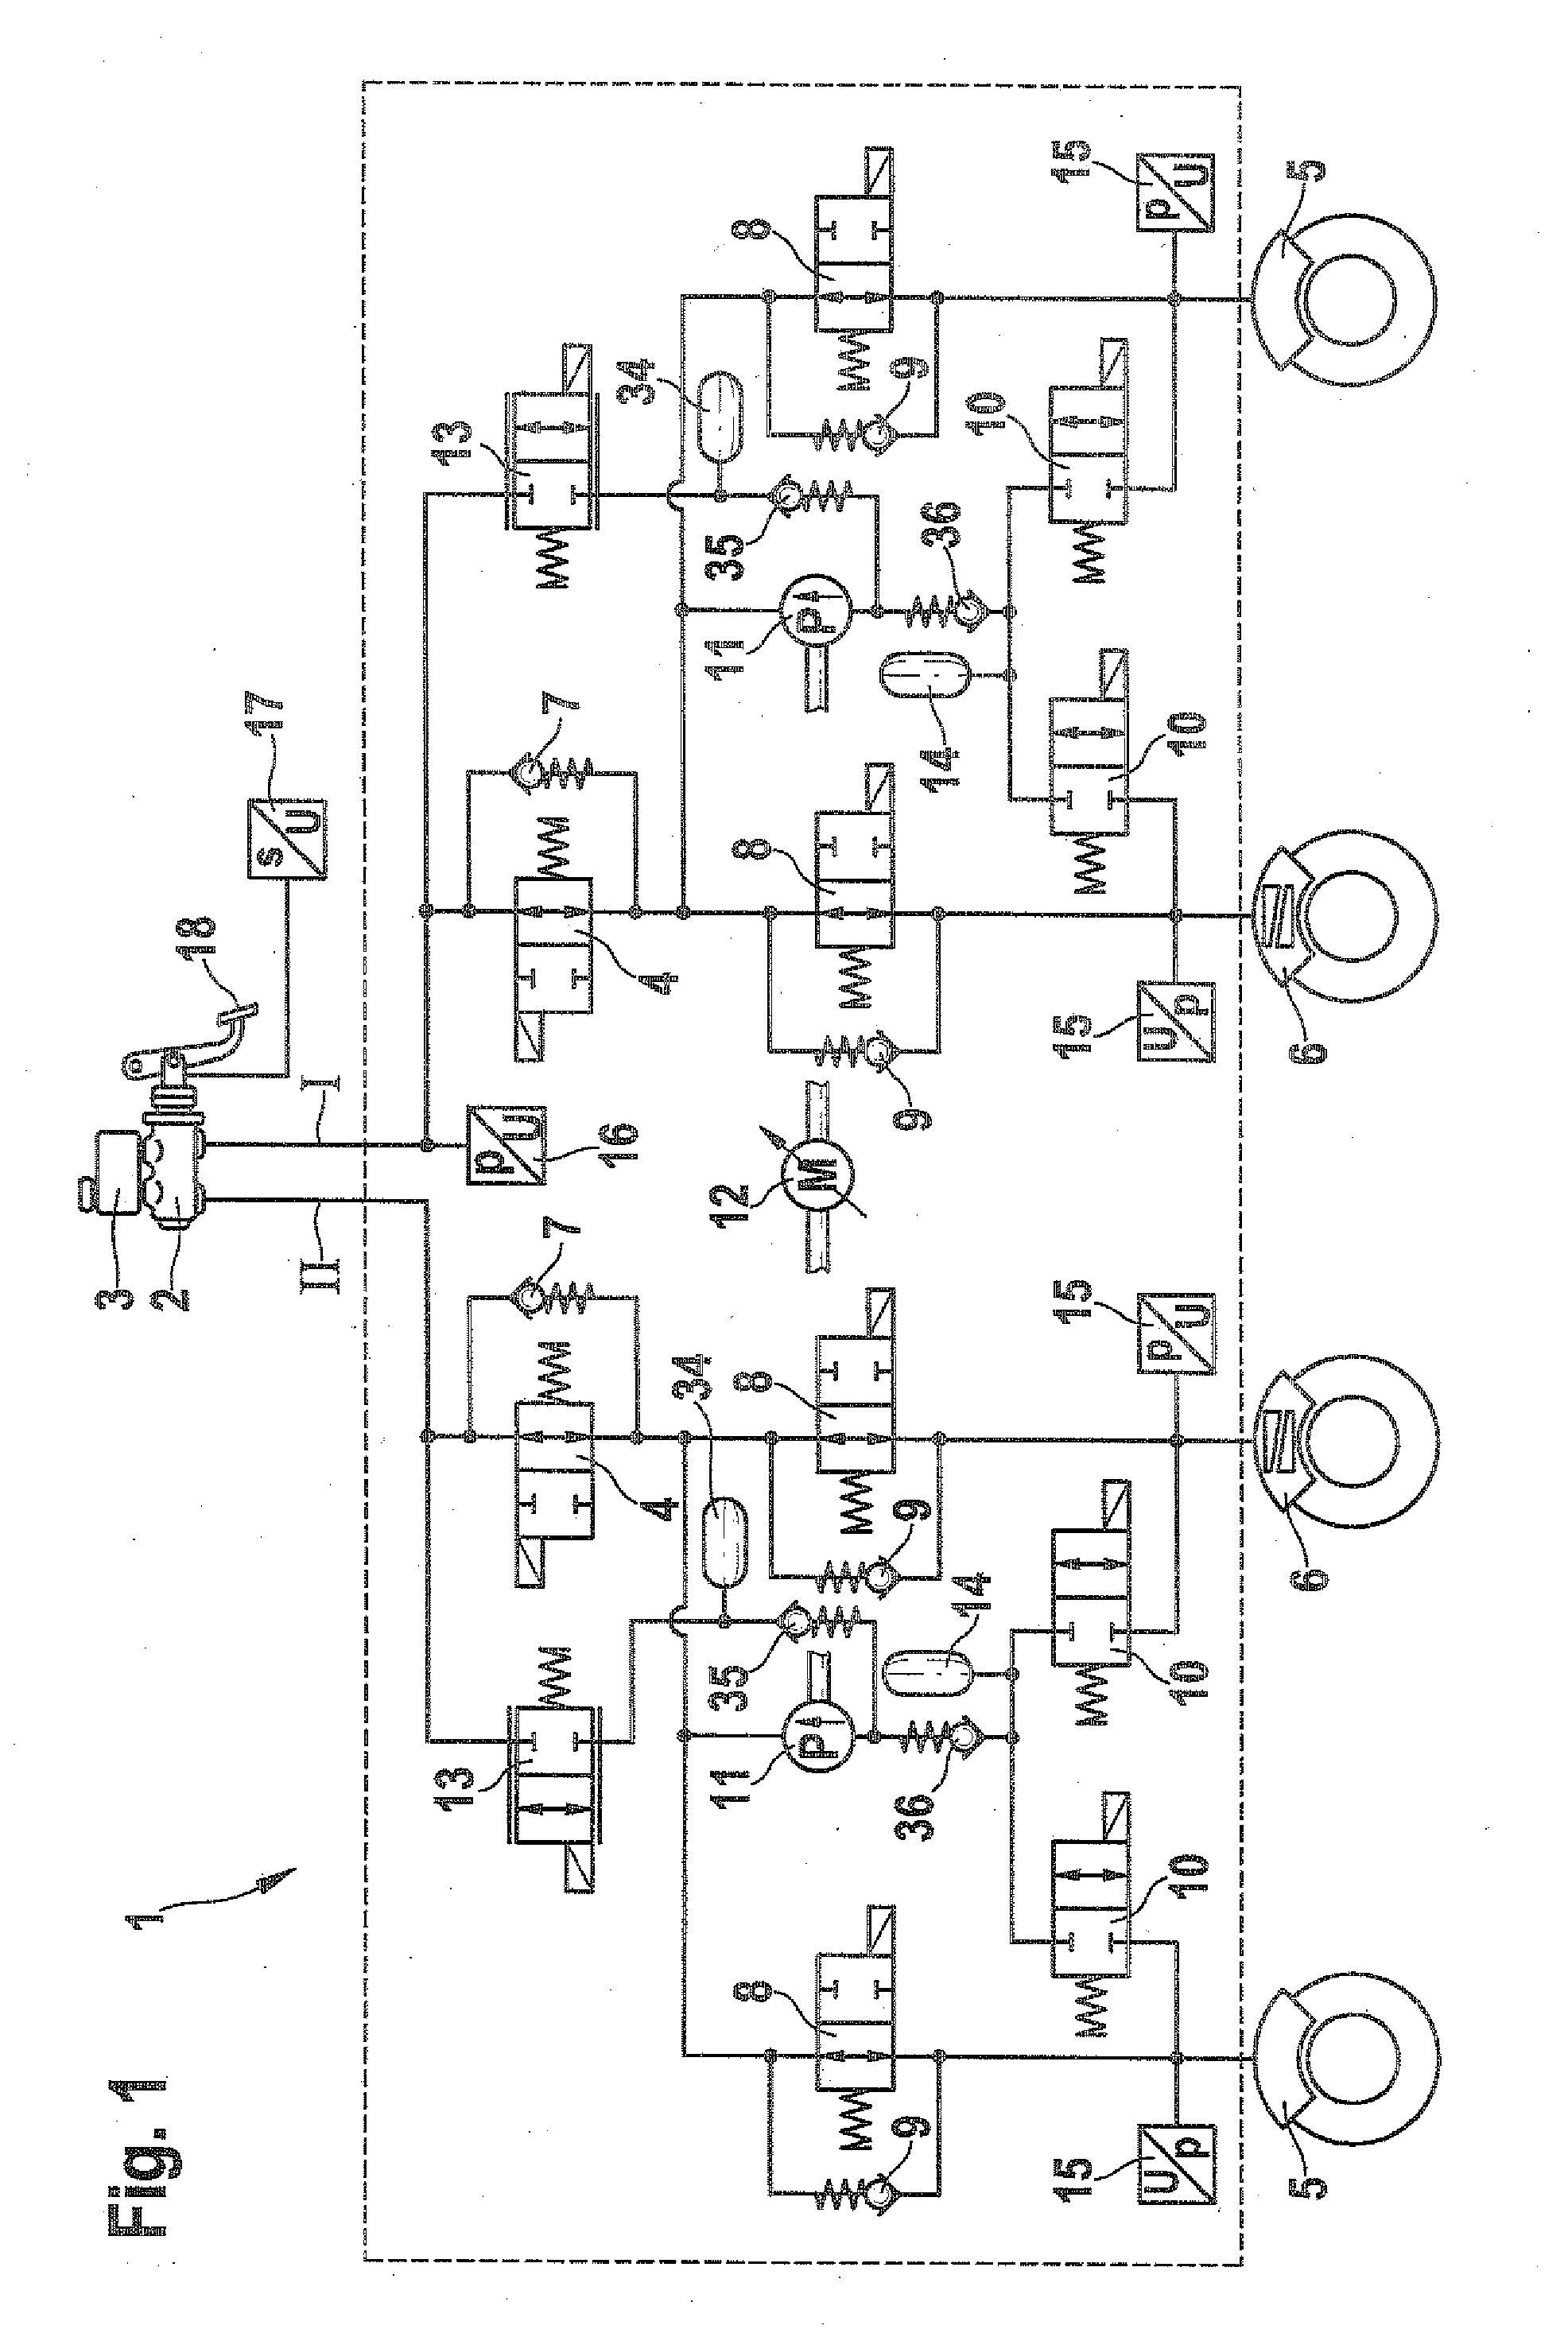 Hydraulic vehicle brake system and method for its operation